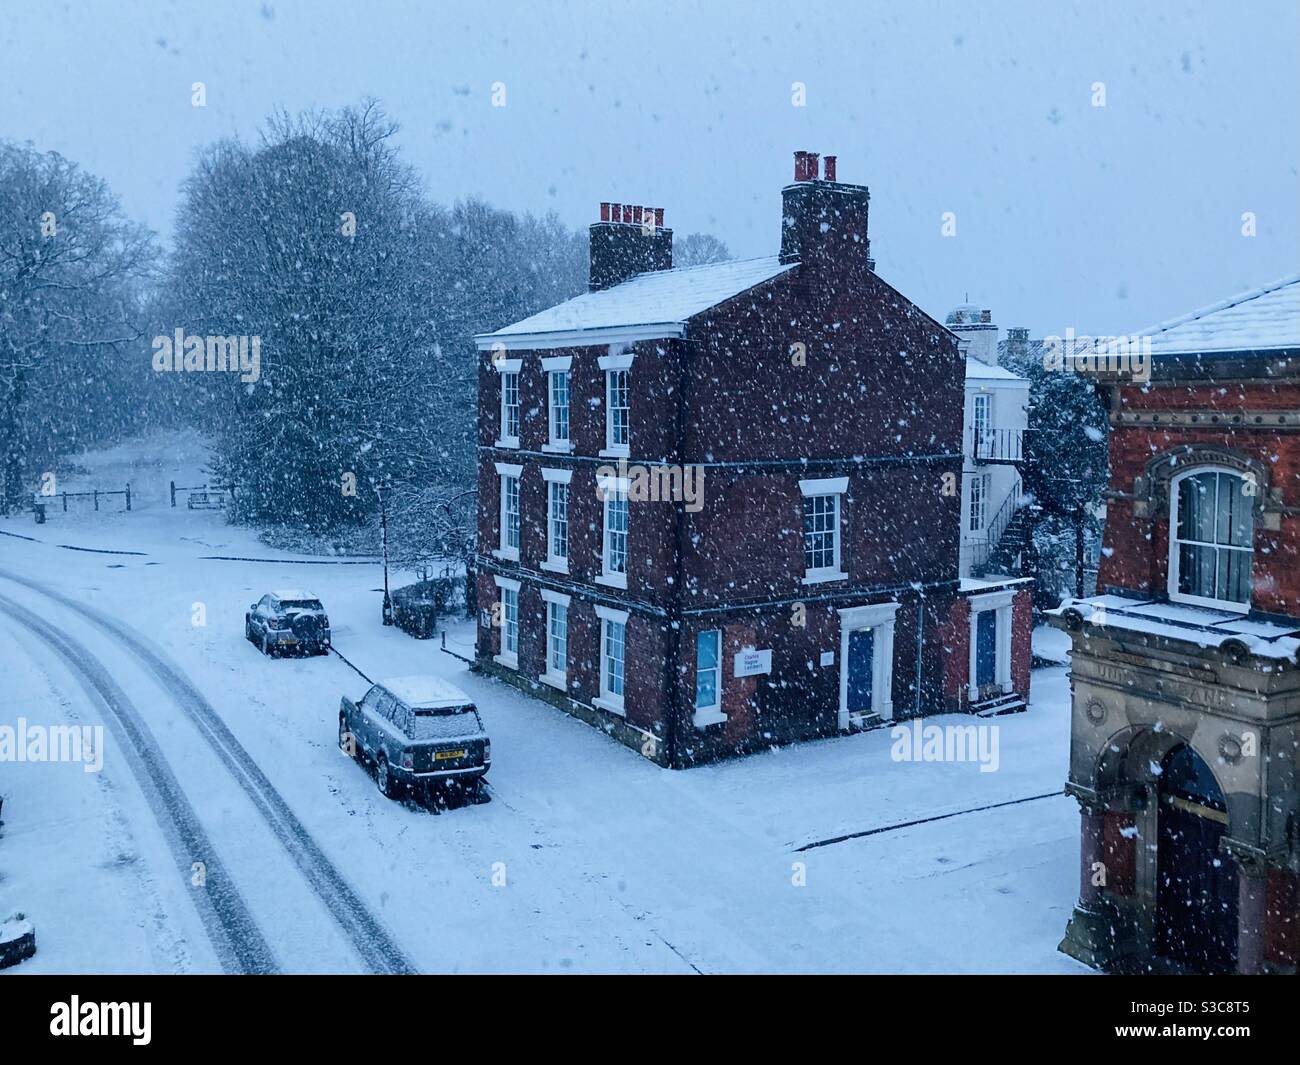 Snowing in Knutsford Cheshire Stock Photo